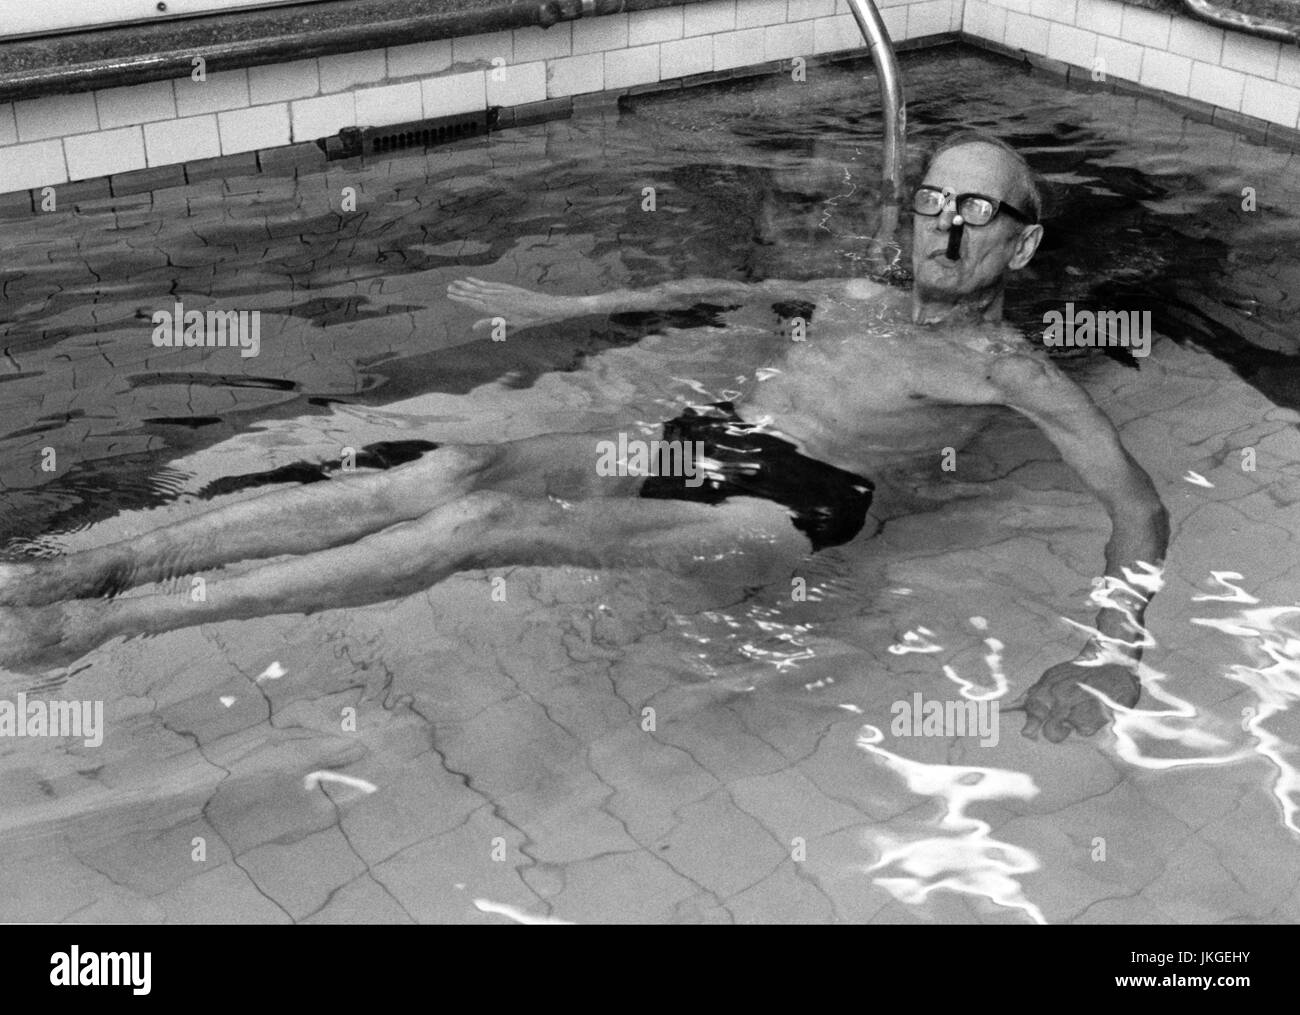 ARNE BORG Swedish swimmer and world record holder in the early 1900s.On the picture in the Centralbadet bassin in Stockholm with cigar in his daily sw Stock Photo